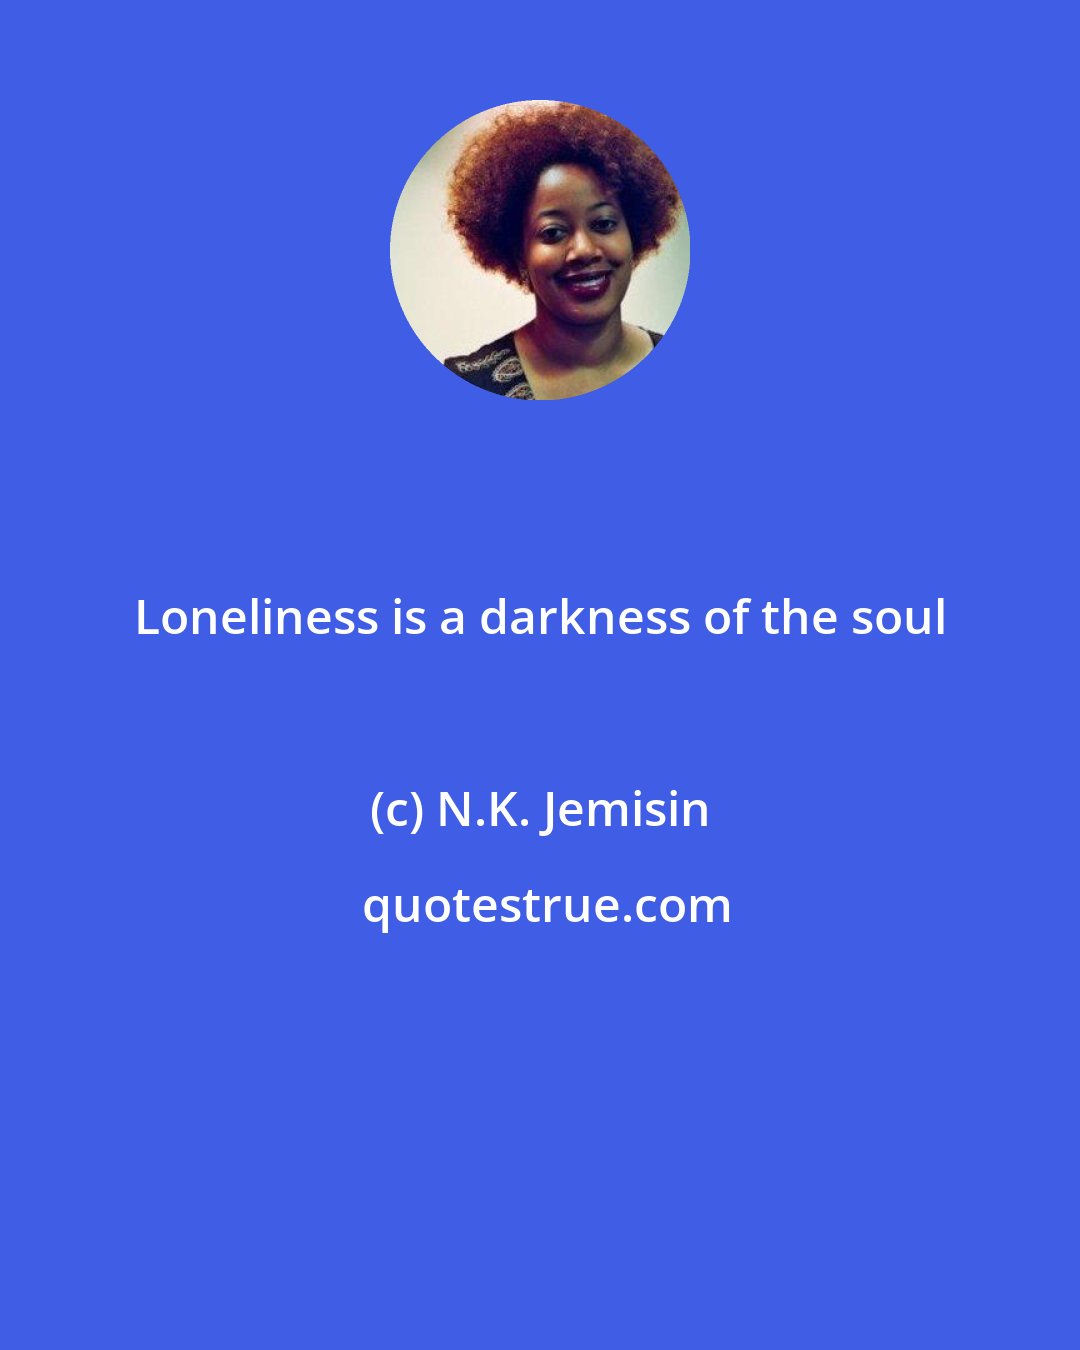 N.K. Jemisin: Loneliness is a darkness of the soul